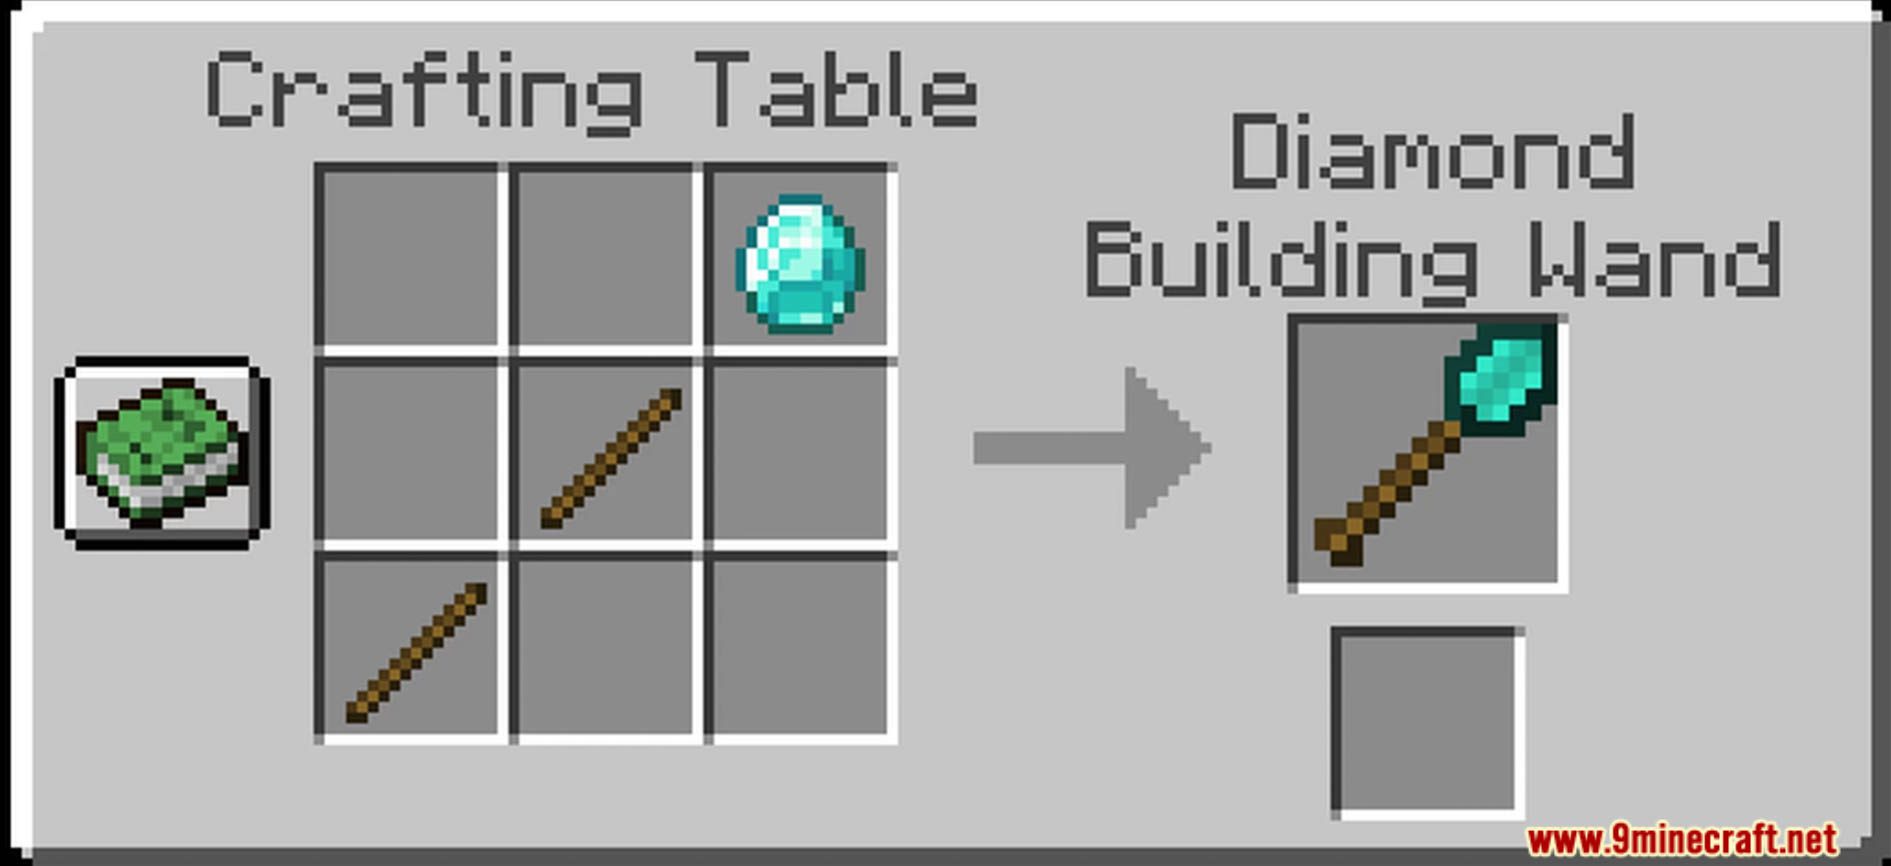 Building Wands Data Pack (1.20.4, 1.19.4) - Elevate Your Construction Mastery! 8